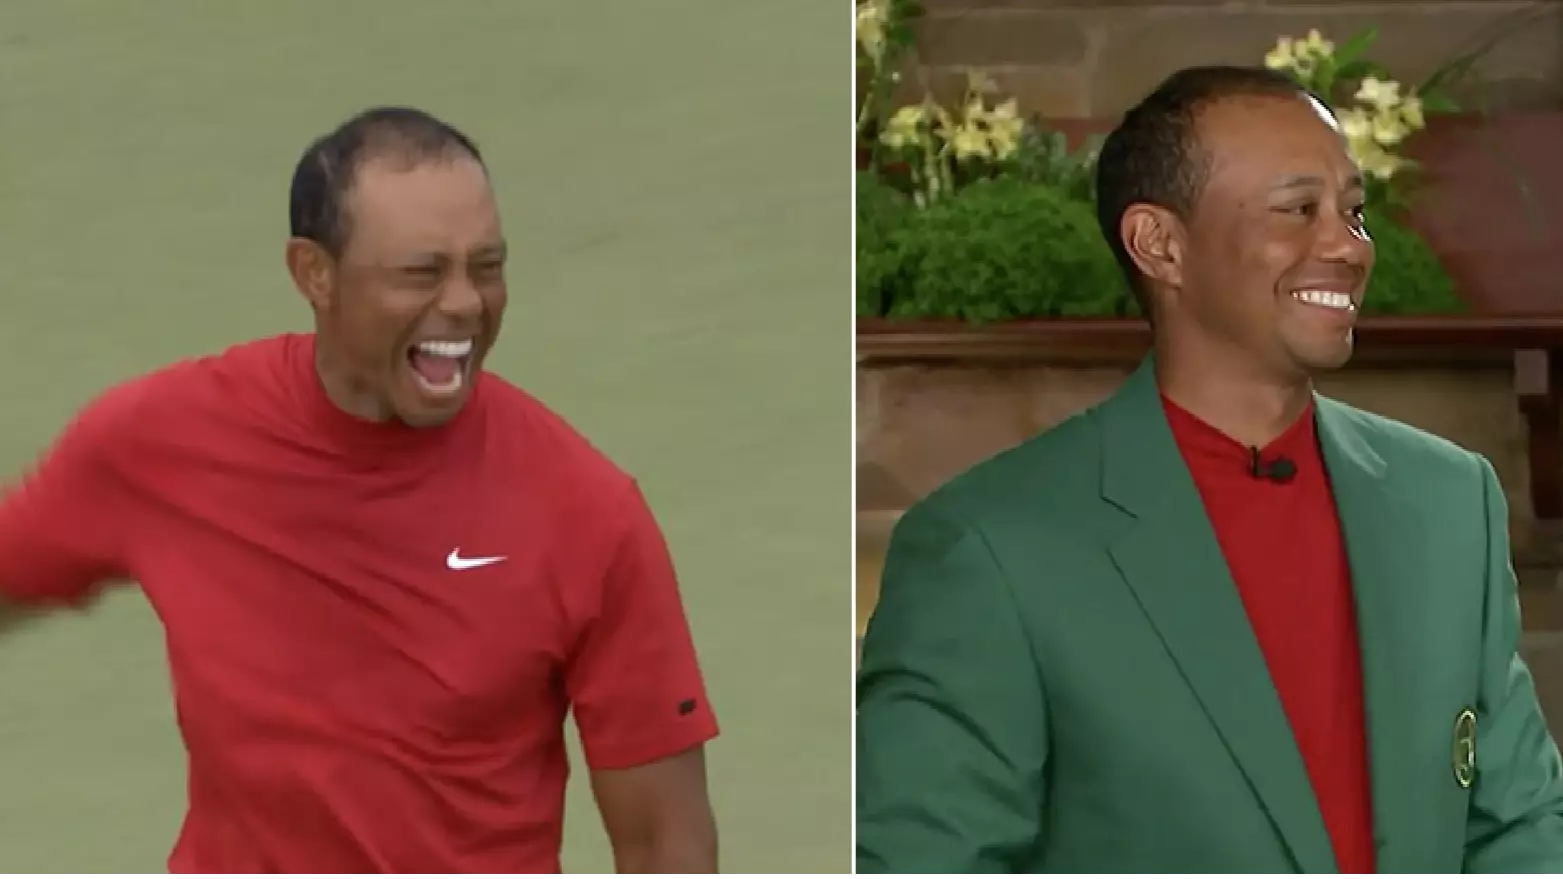 Emotional Tiger Woods Slips Into Prestigious Green Jacket And Says 'It Fits'